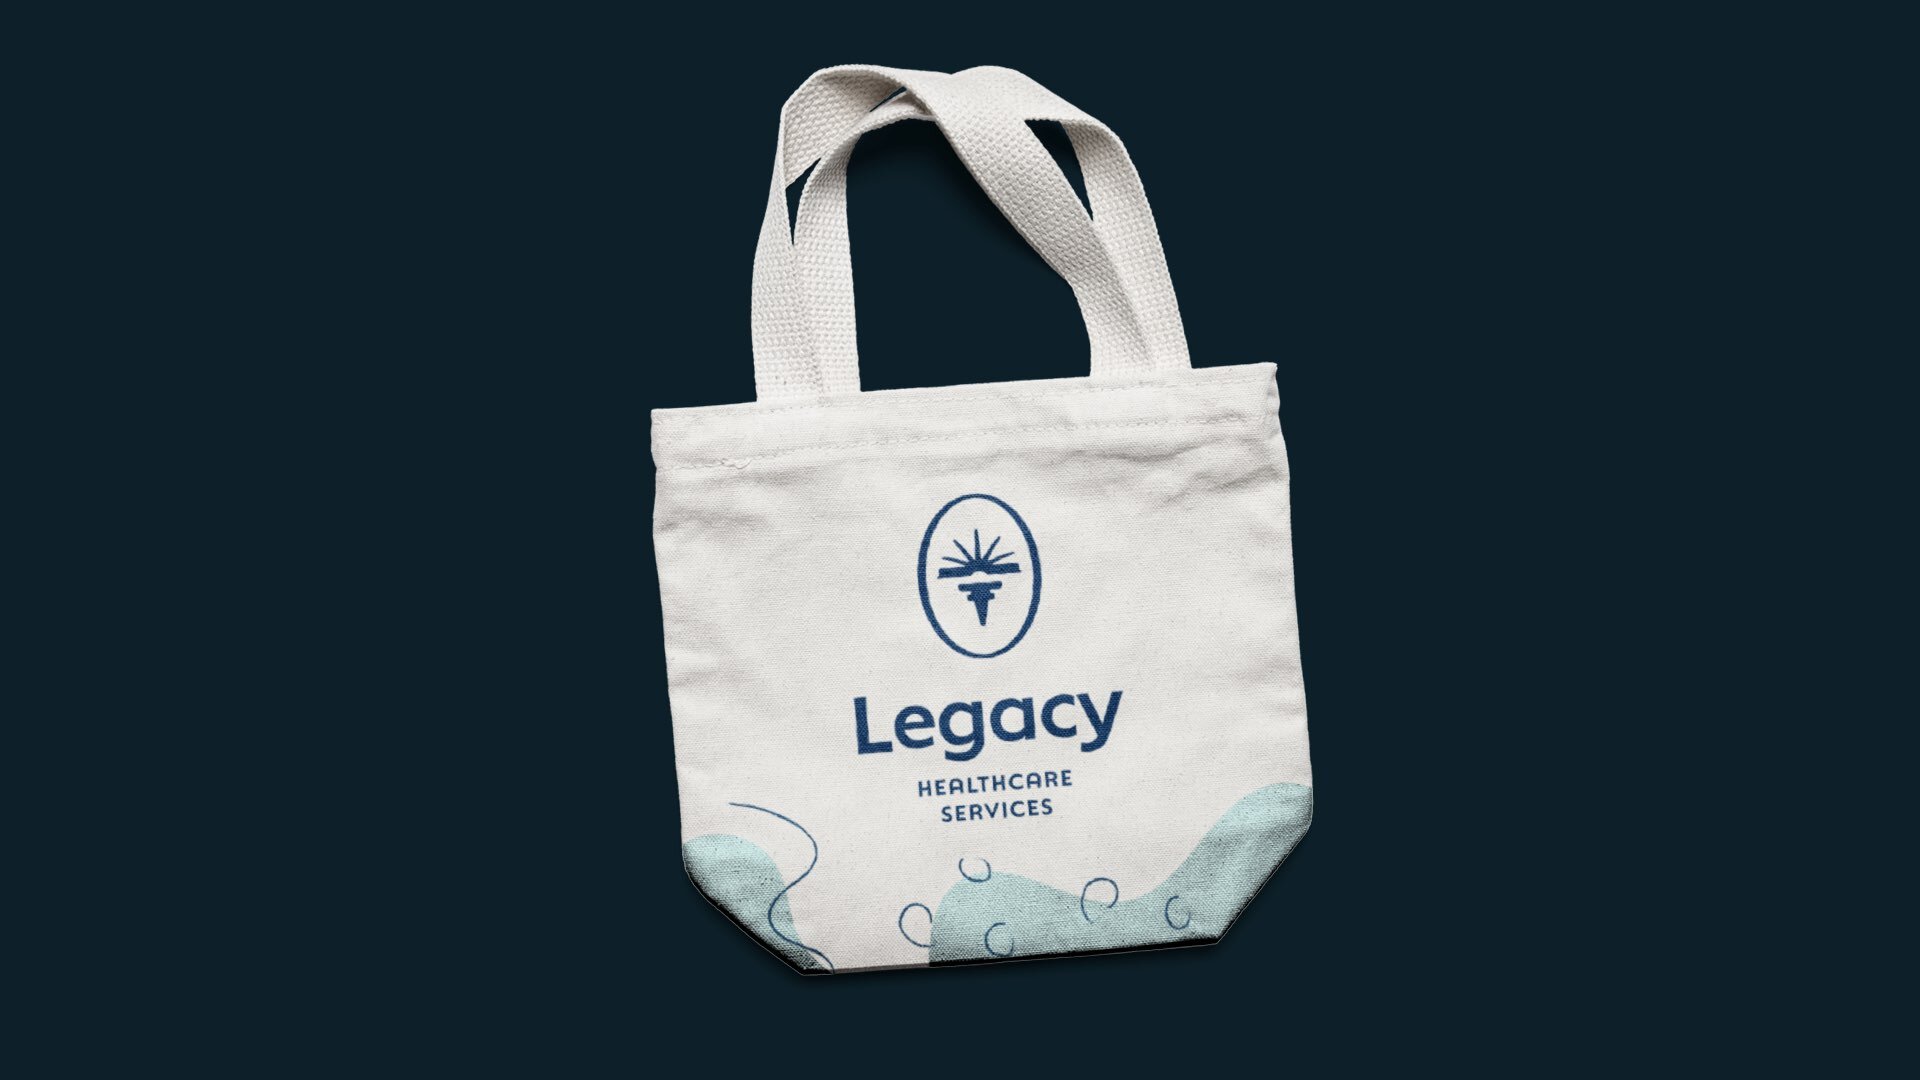 Legacy Healthcare Services rebrand logo design applied to a tote bag